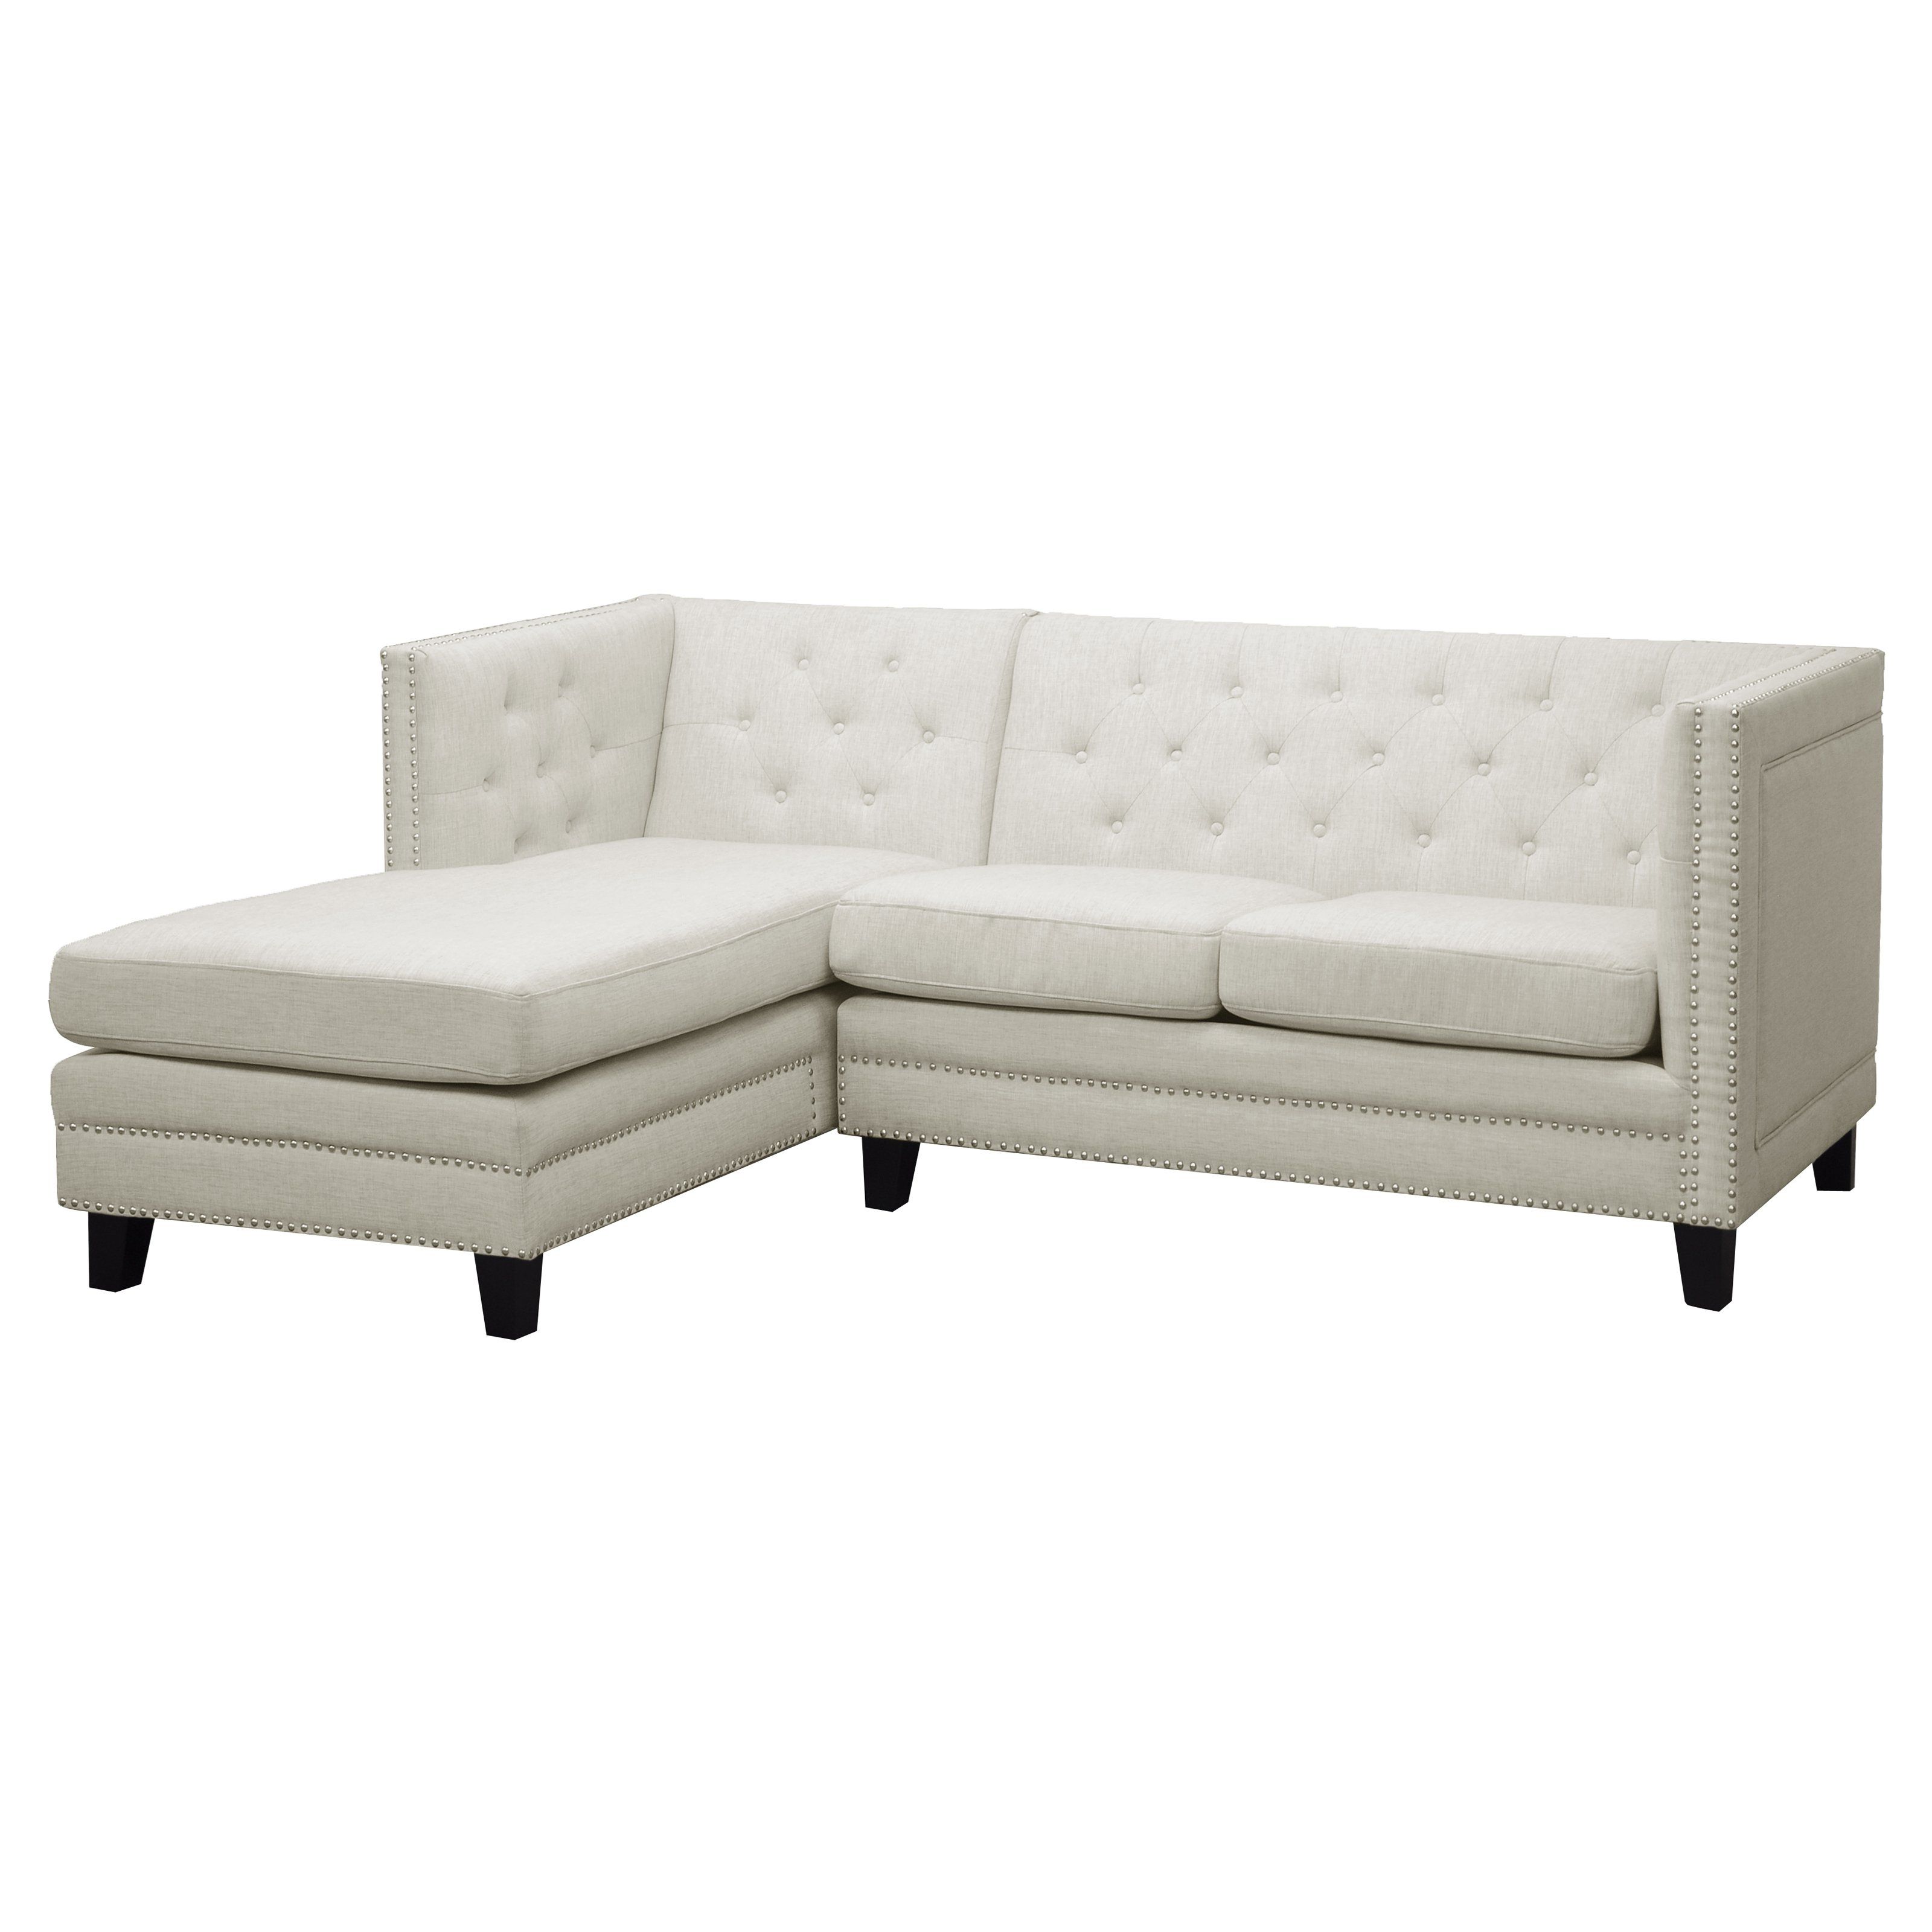 Chaise Lounge Sleepers With Famous Idyllic White Tuxedo Tufted Sectional With Chaise Lounge Sleepers (View 12 of 15)